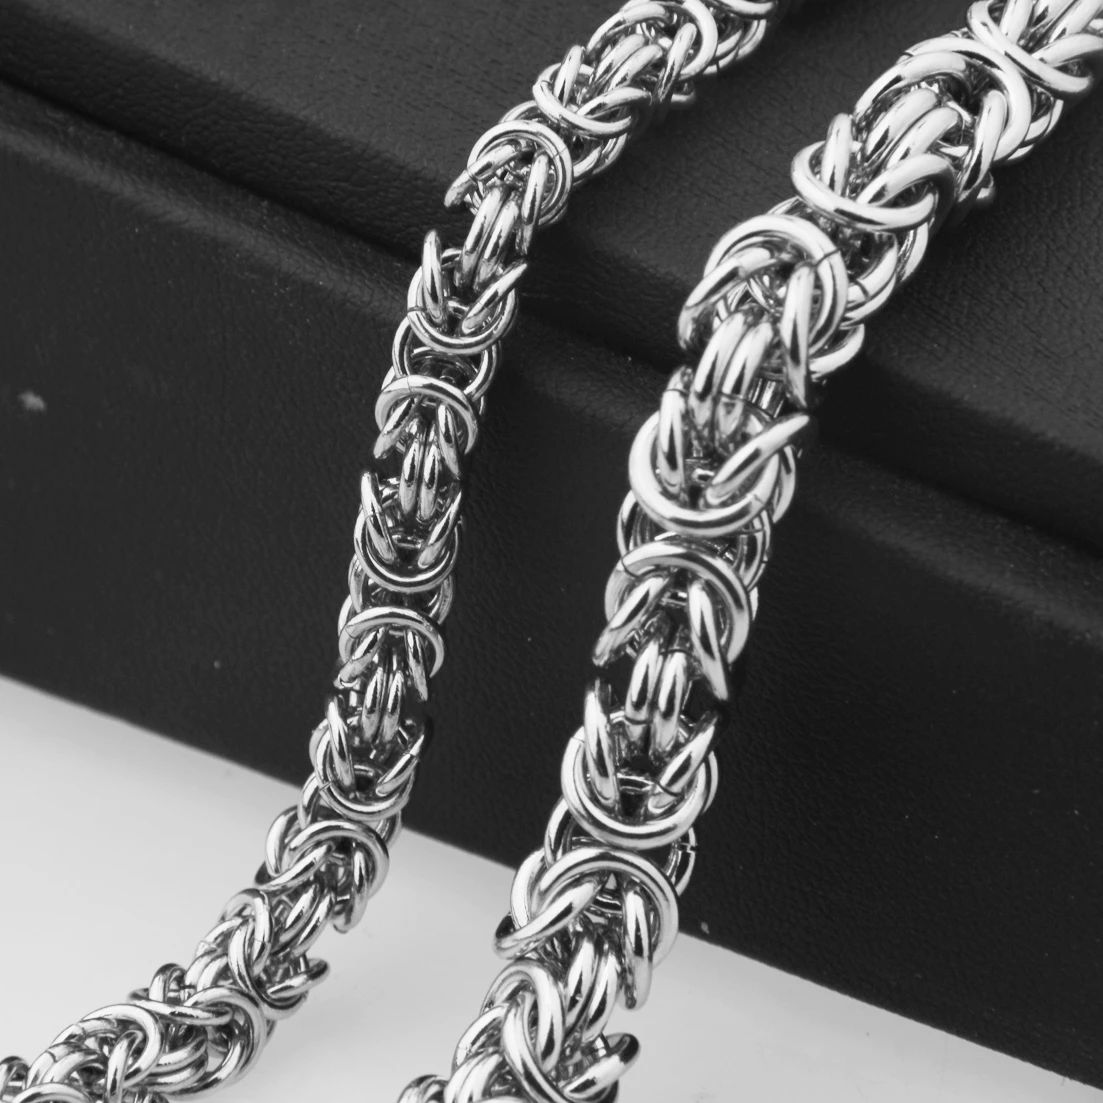 Fashion Men's Jewelry Trendy Stainless Steel Byzantine Chain Necklace Link Chain 7